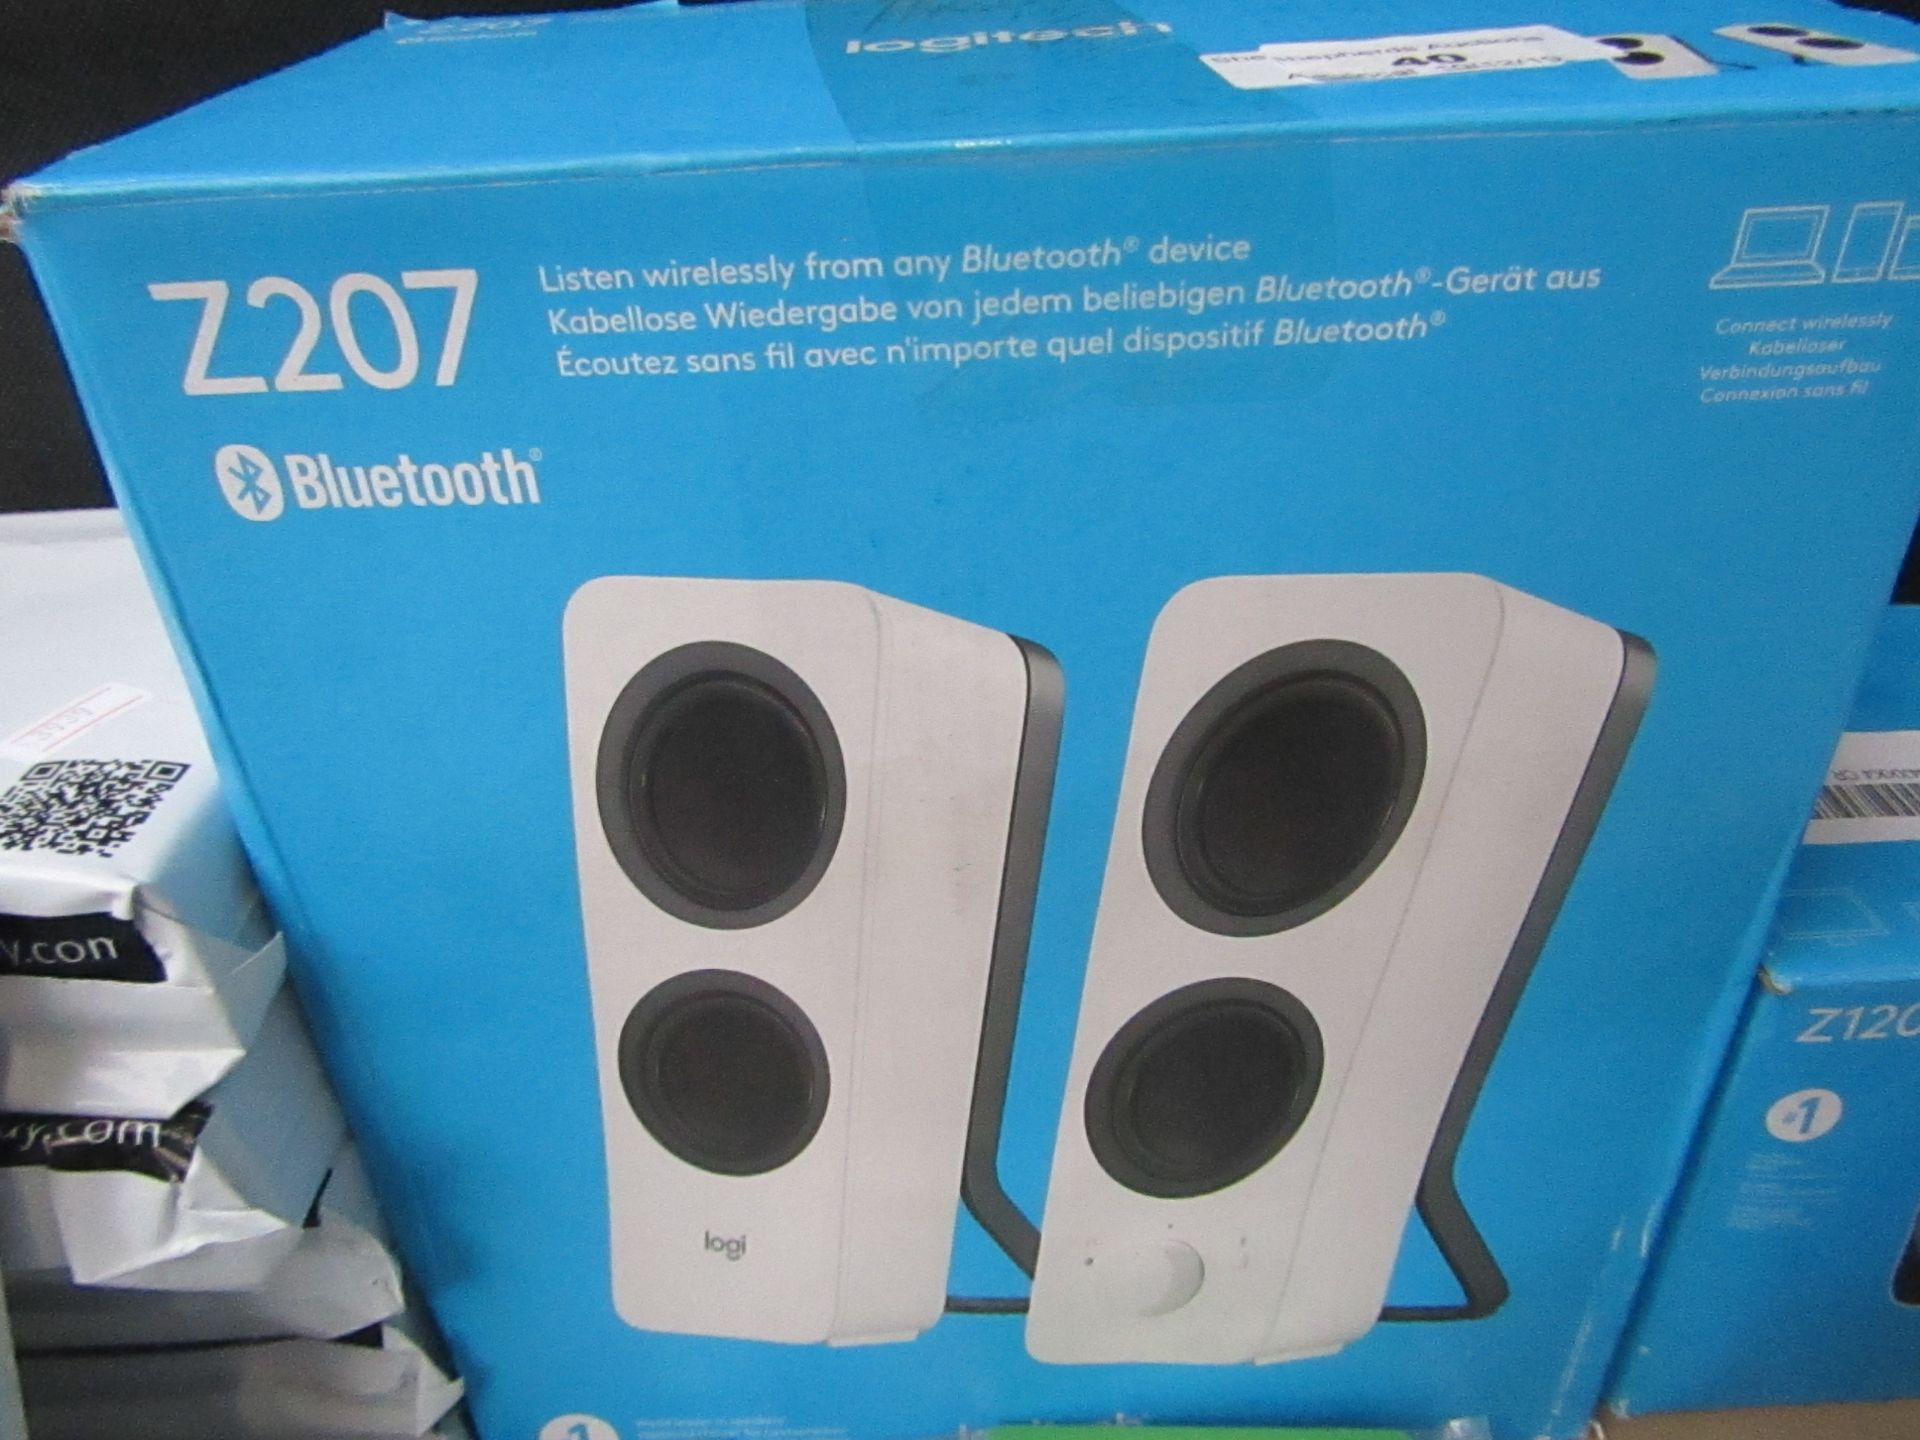 Logitech - Z207 - Blue tooth speakers (white) untested and boxed.